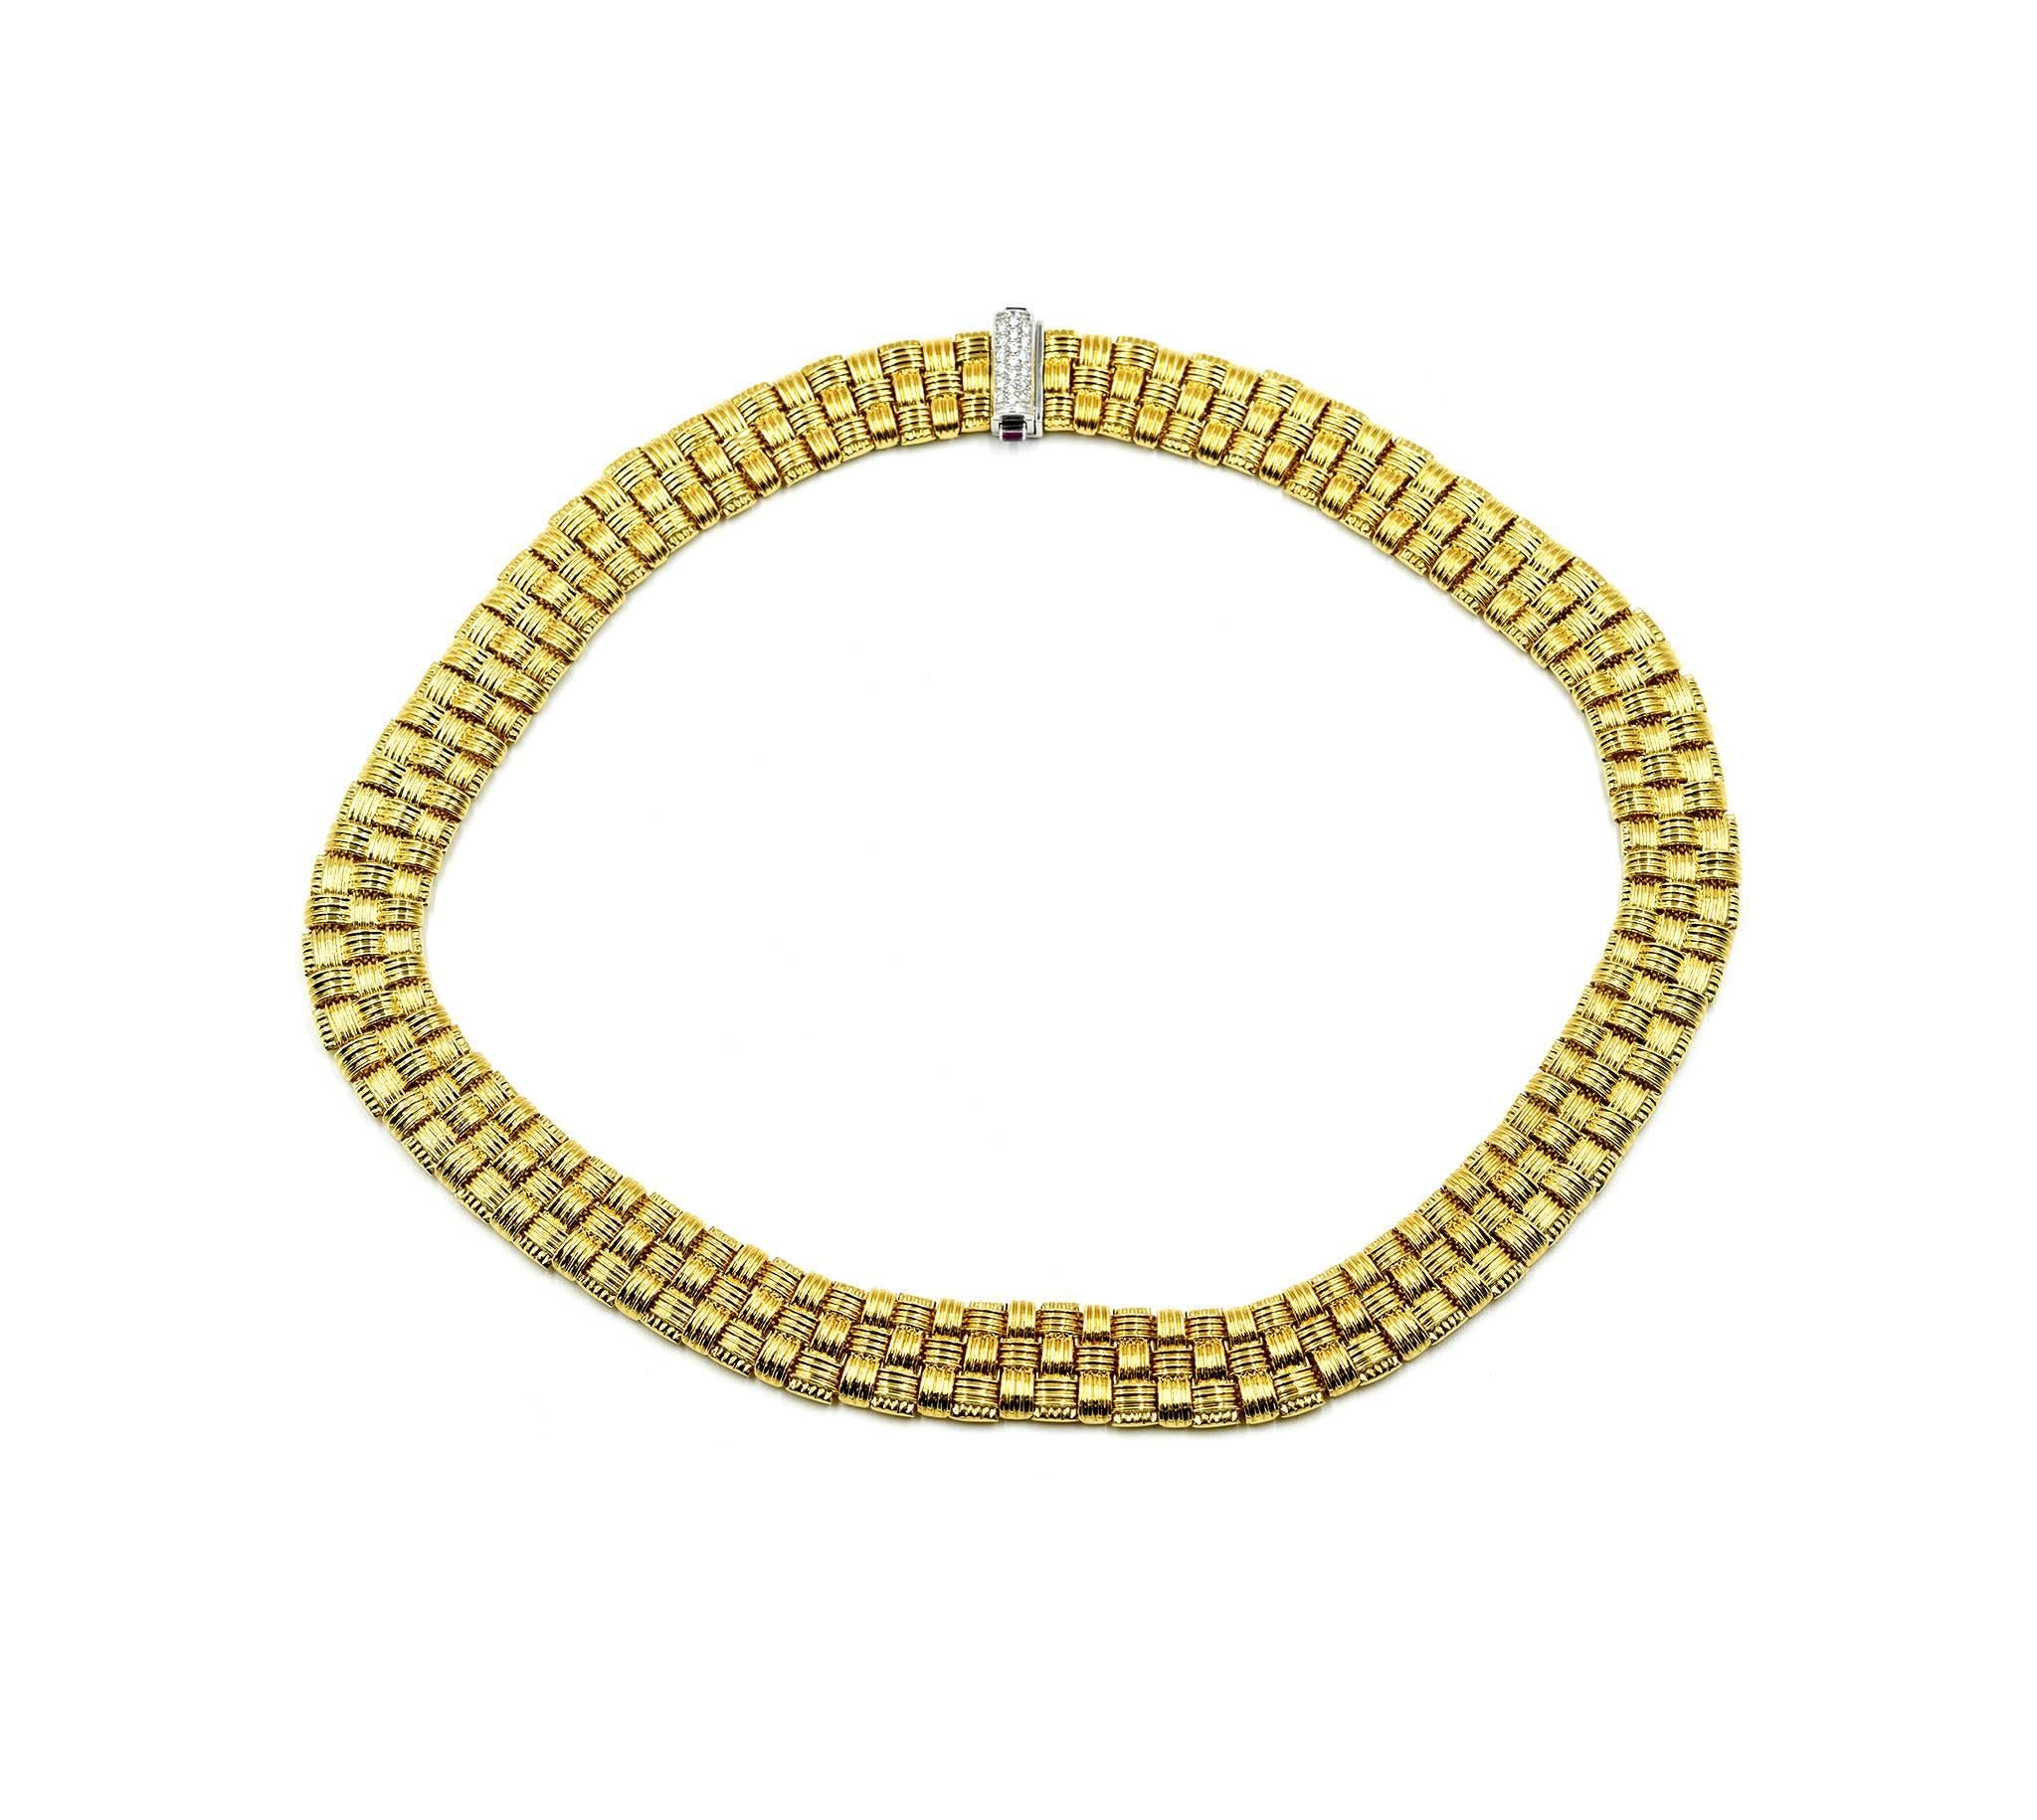 Designer: Roberto Coin
Material: 18k yellow gold
Diamonds: 19 round brilliant cuts = 0.57 carat total weight
Dimensions: necklace measures 17 inches long and ½ inch wide
Weight: 126.29 grams
Retail: $20,400

